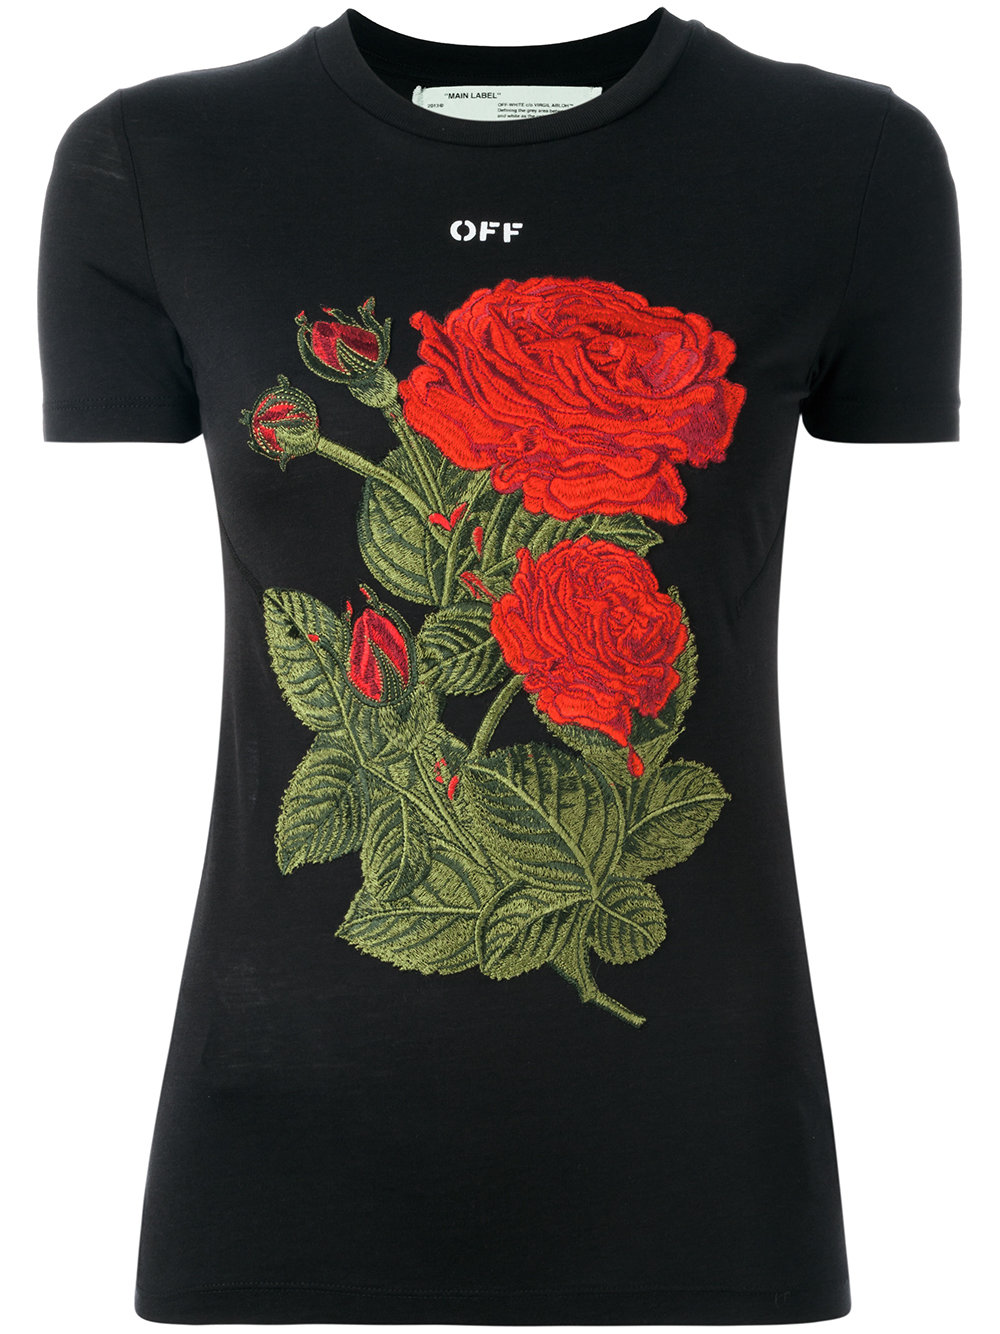 Off-White roses patch T-shirt Clearance Sale NERO Women Clothing T-shirts & Jerseys